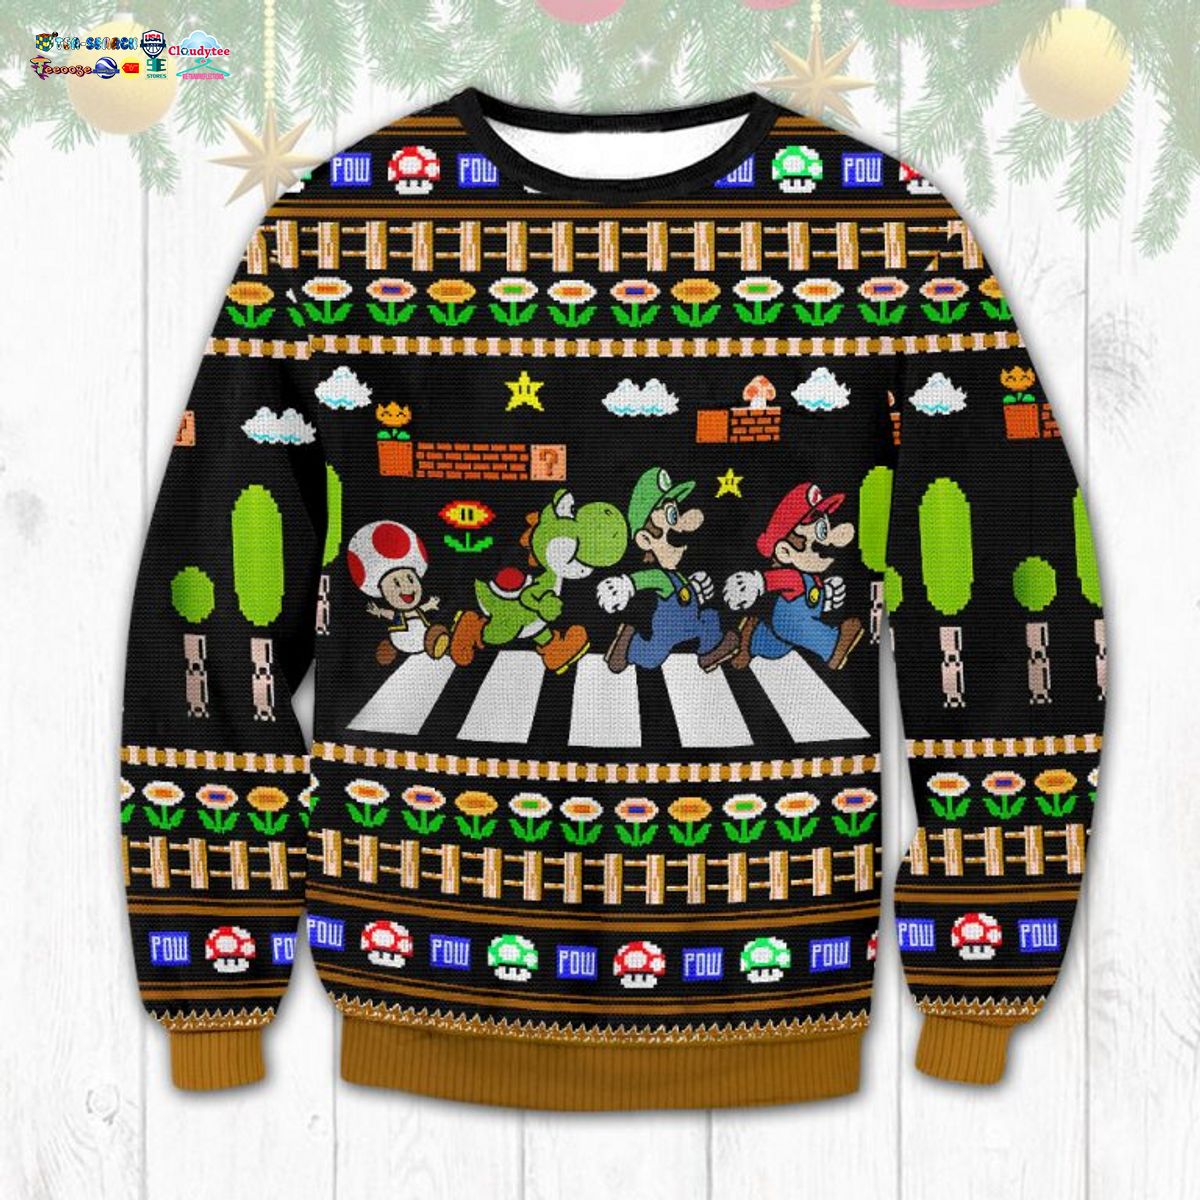 Super Mario Ugly Christmas Sweater - It is too funny